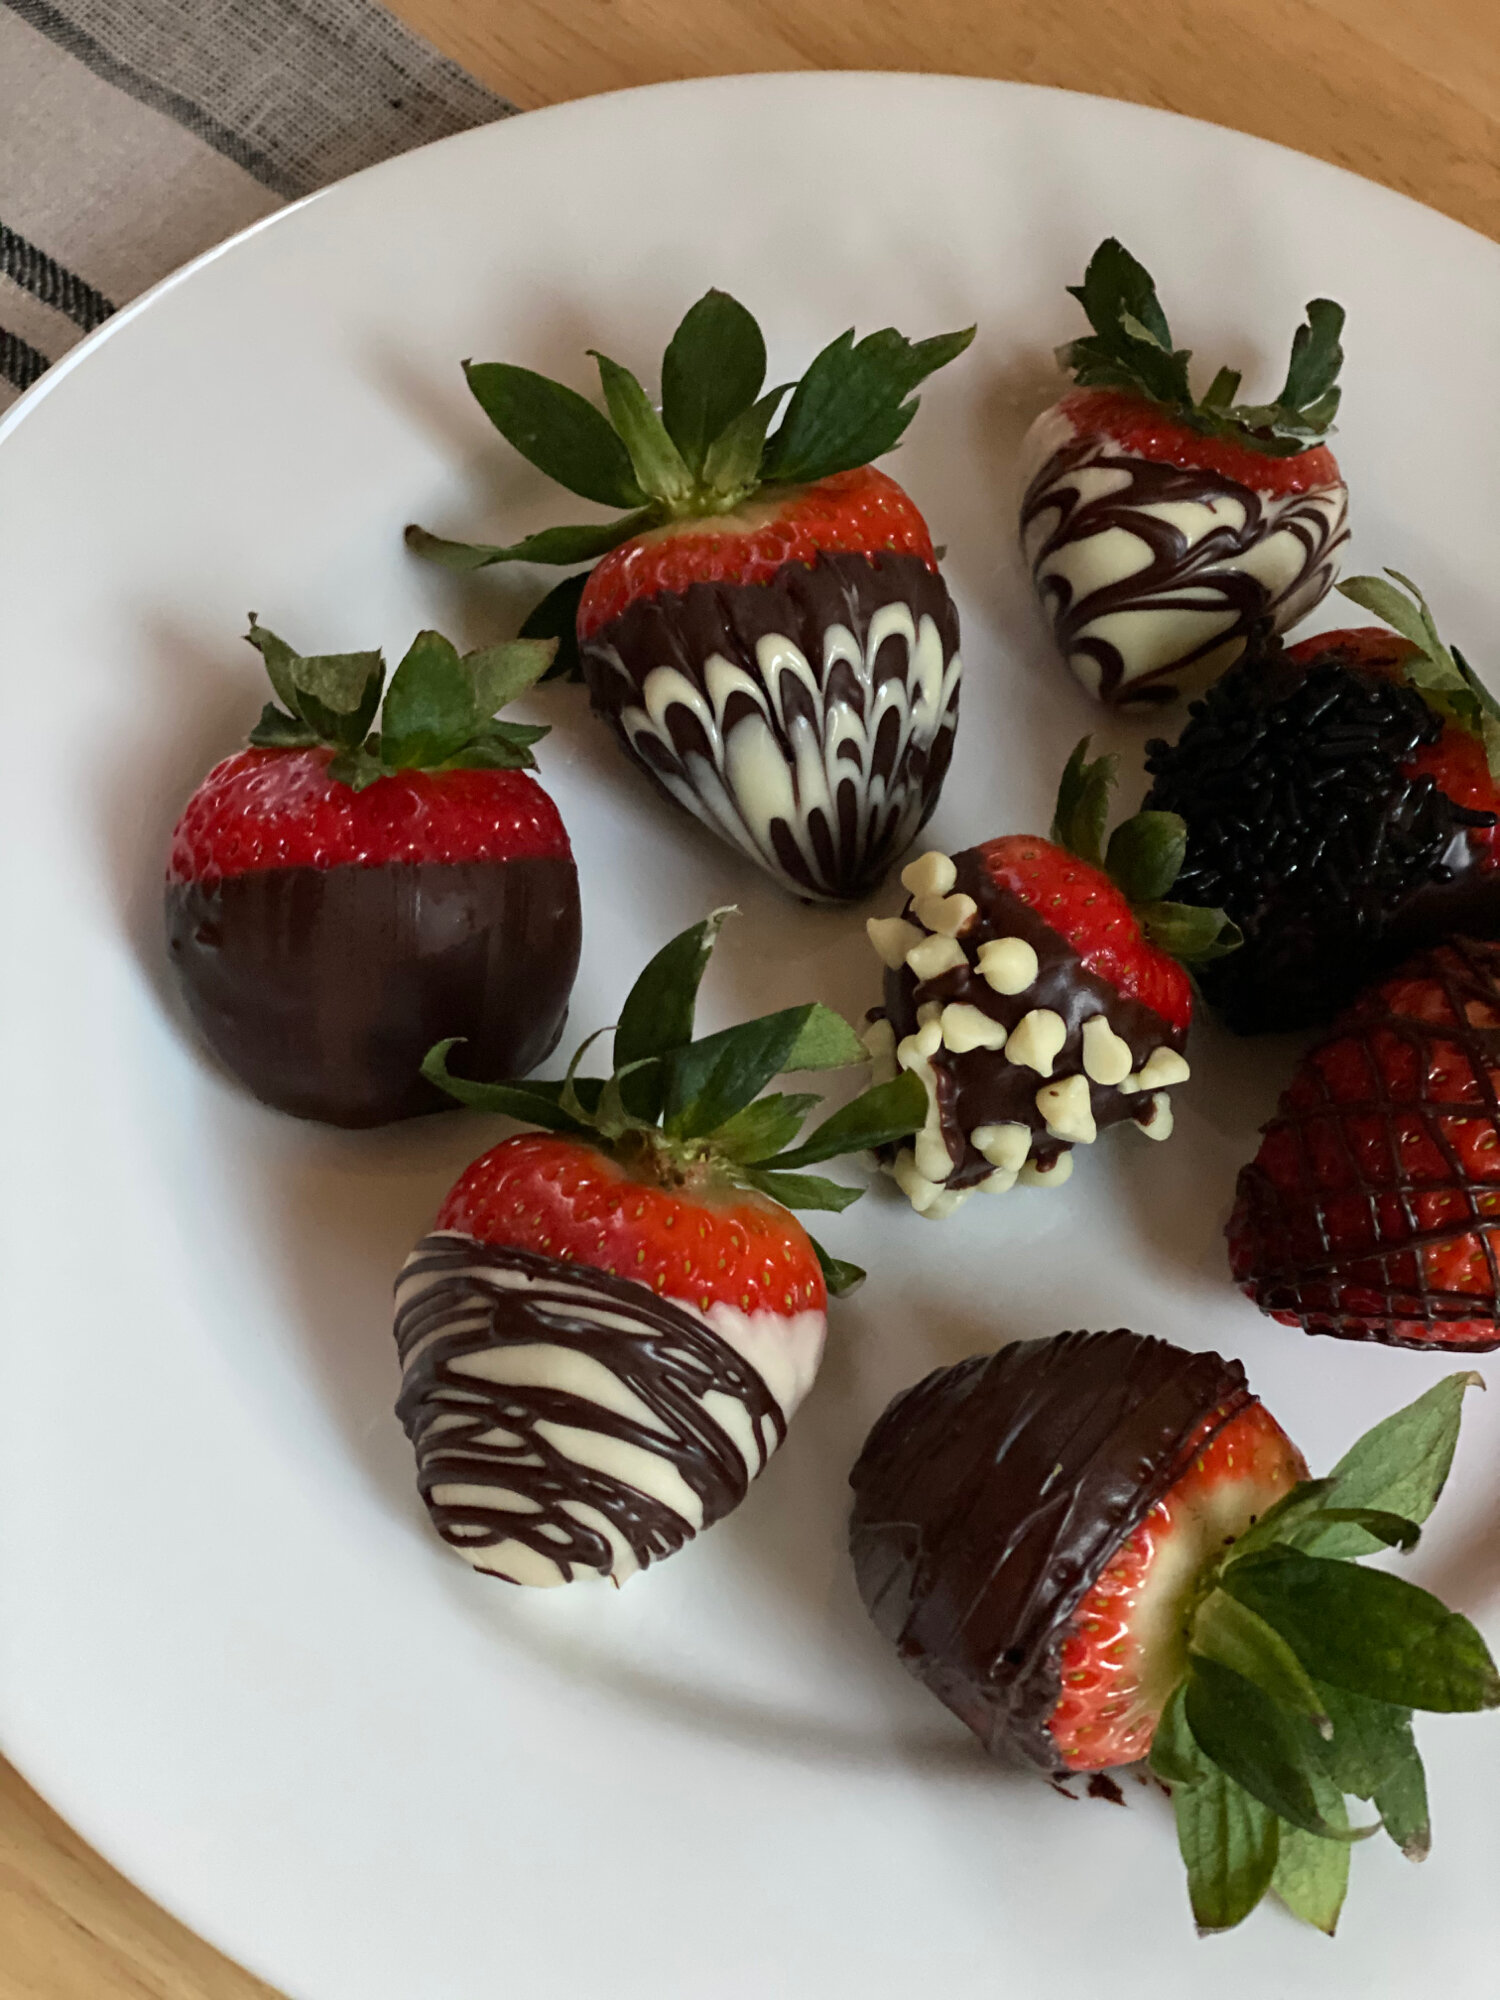 How to Make Chocolate Covered Strawberries Perfectly